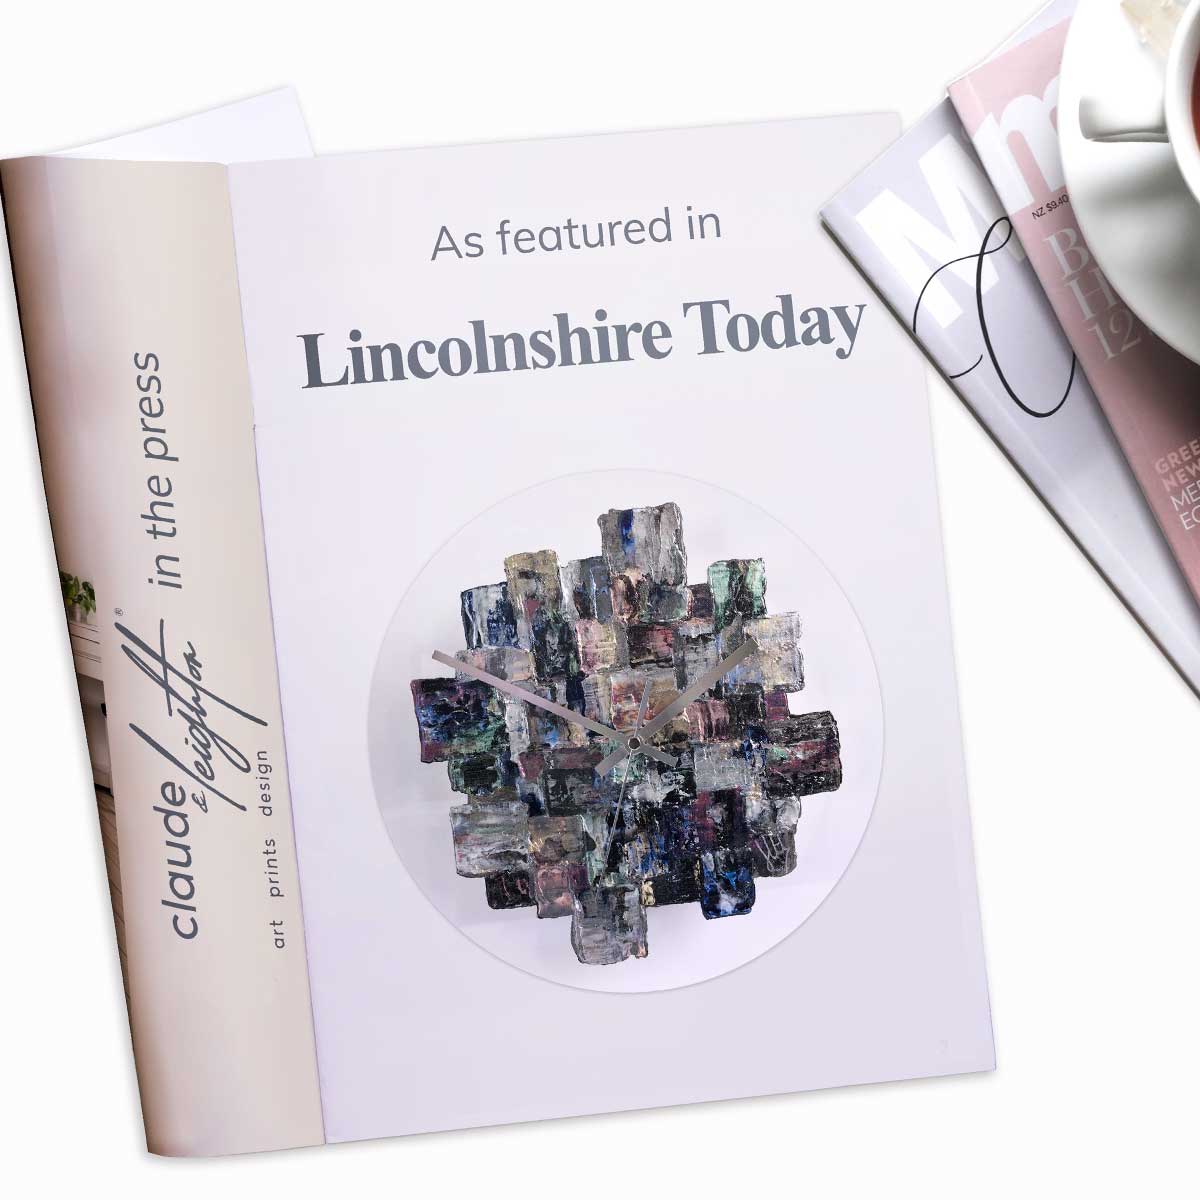 Handpainted round glass wall art clock featured in Lincolnshire Today magazine